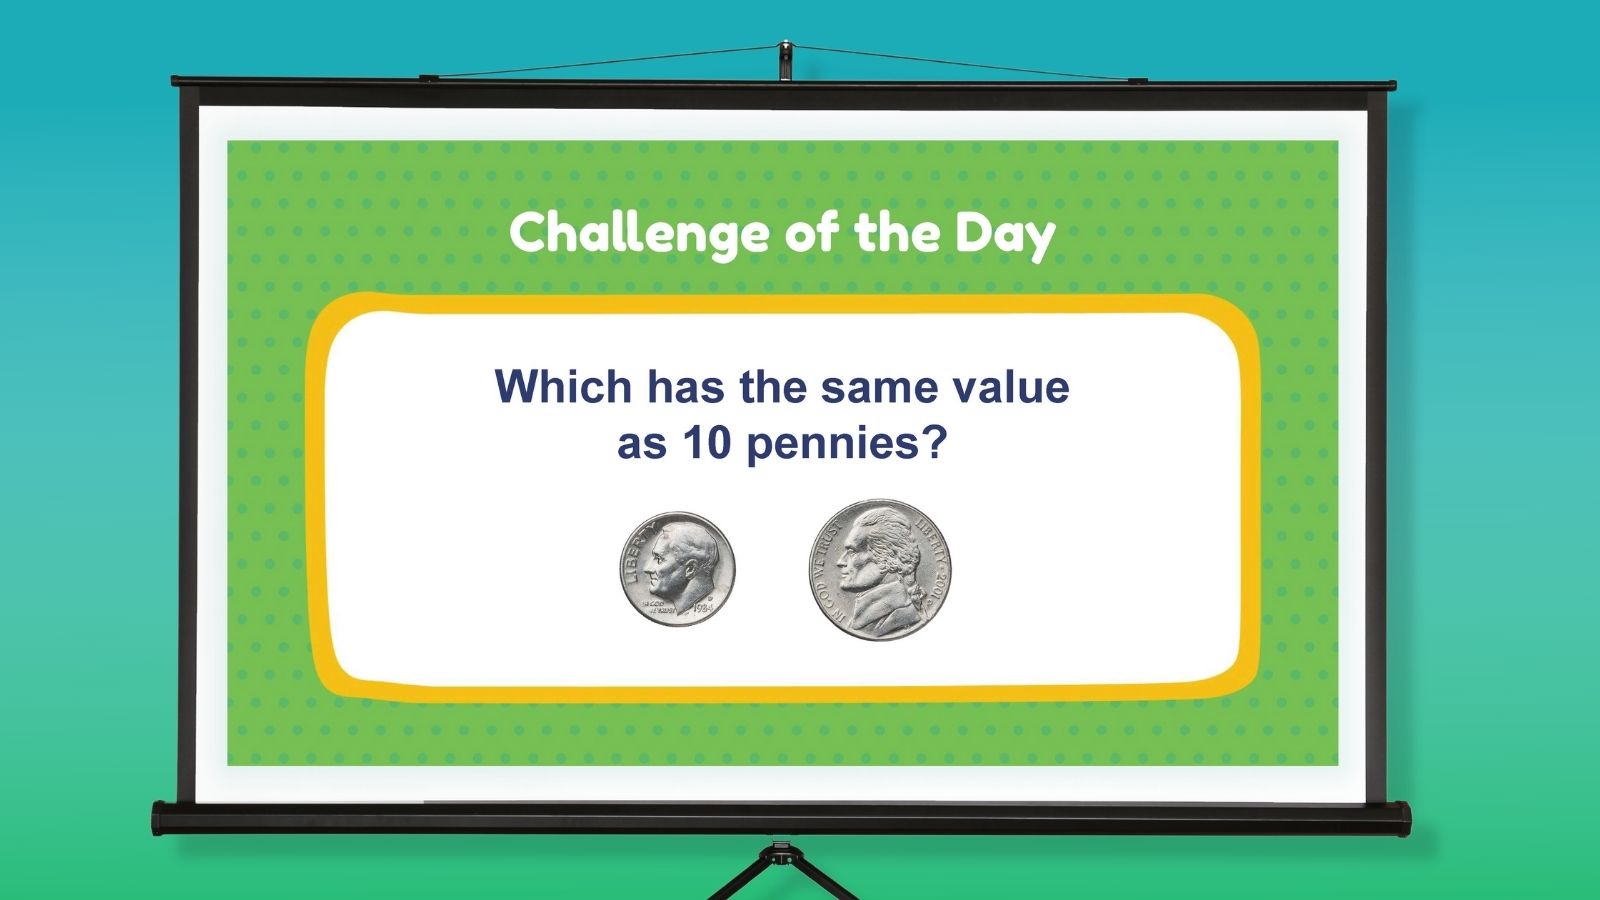 Money word problem on a projector screen: 'Which has the same value as 10 pennies?' with a dime and a nickel